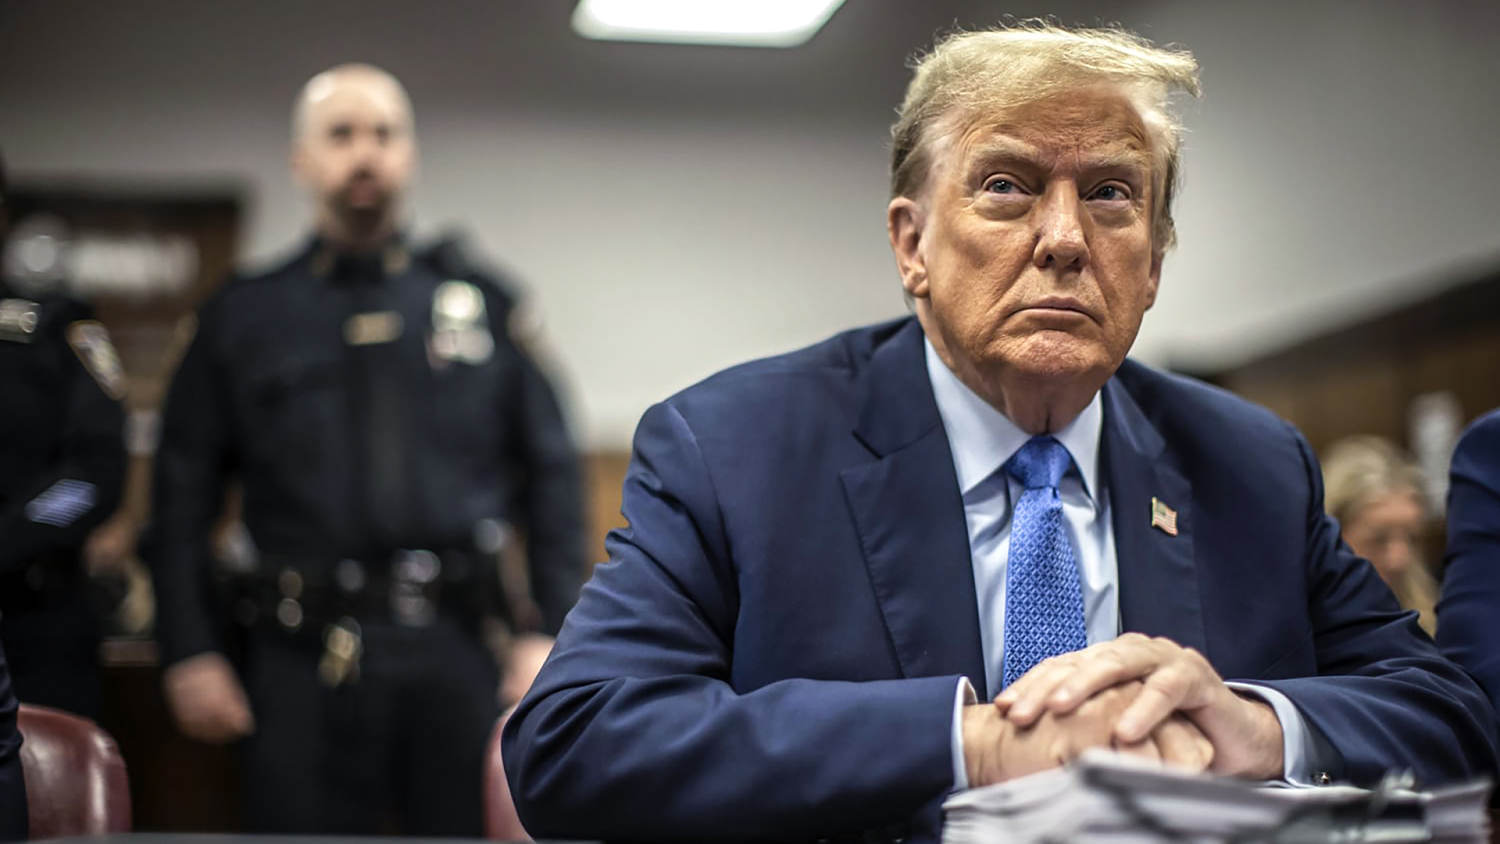 Live coverage: Donald Trump found guilty on all 34 felony counts in hush money trial